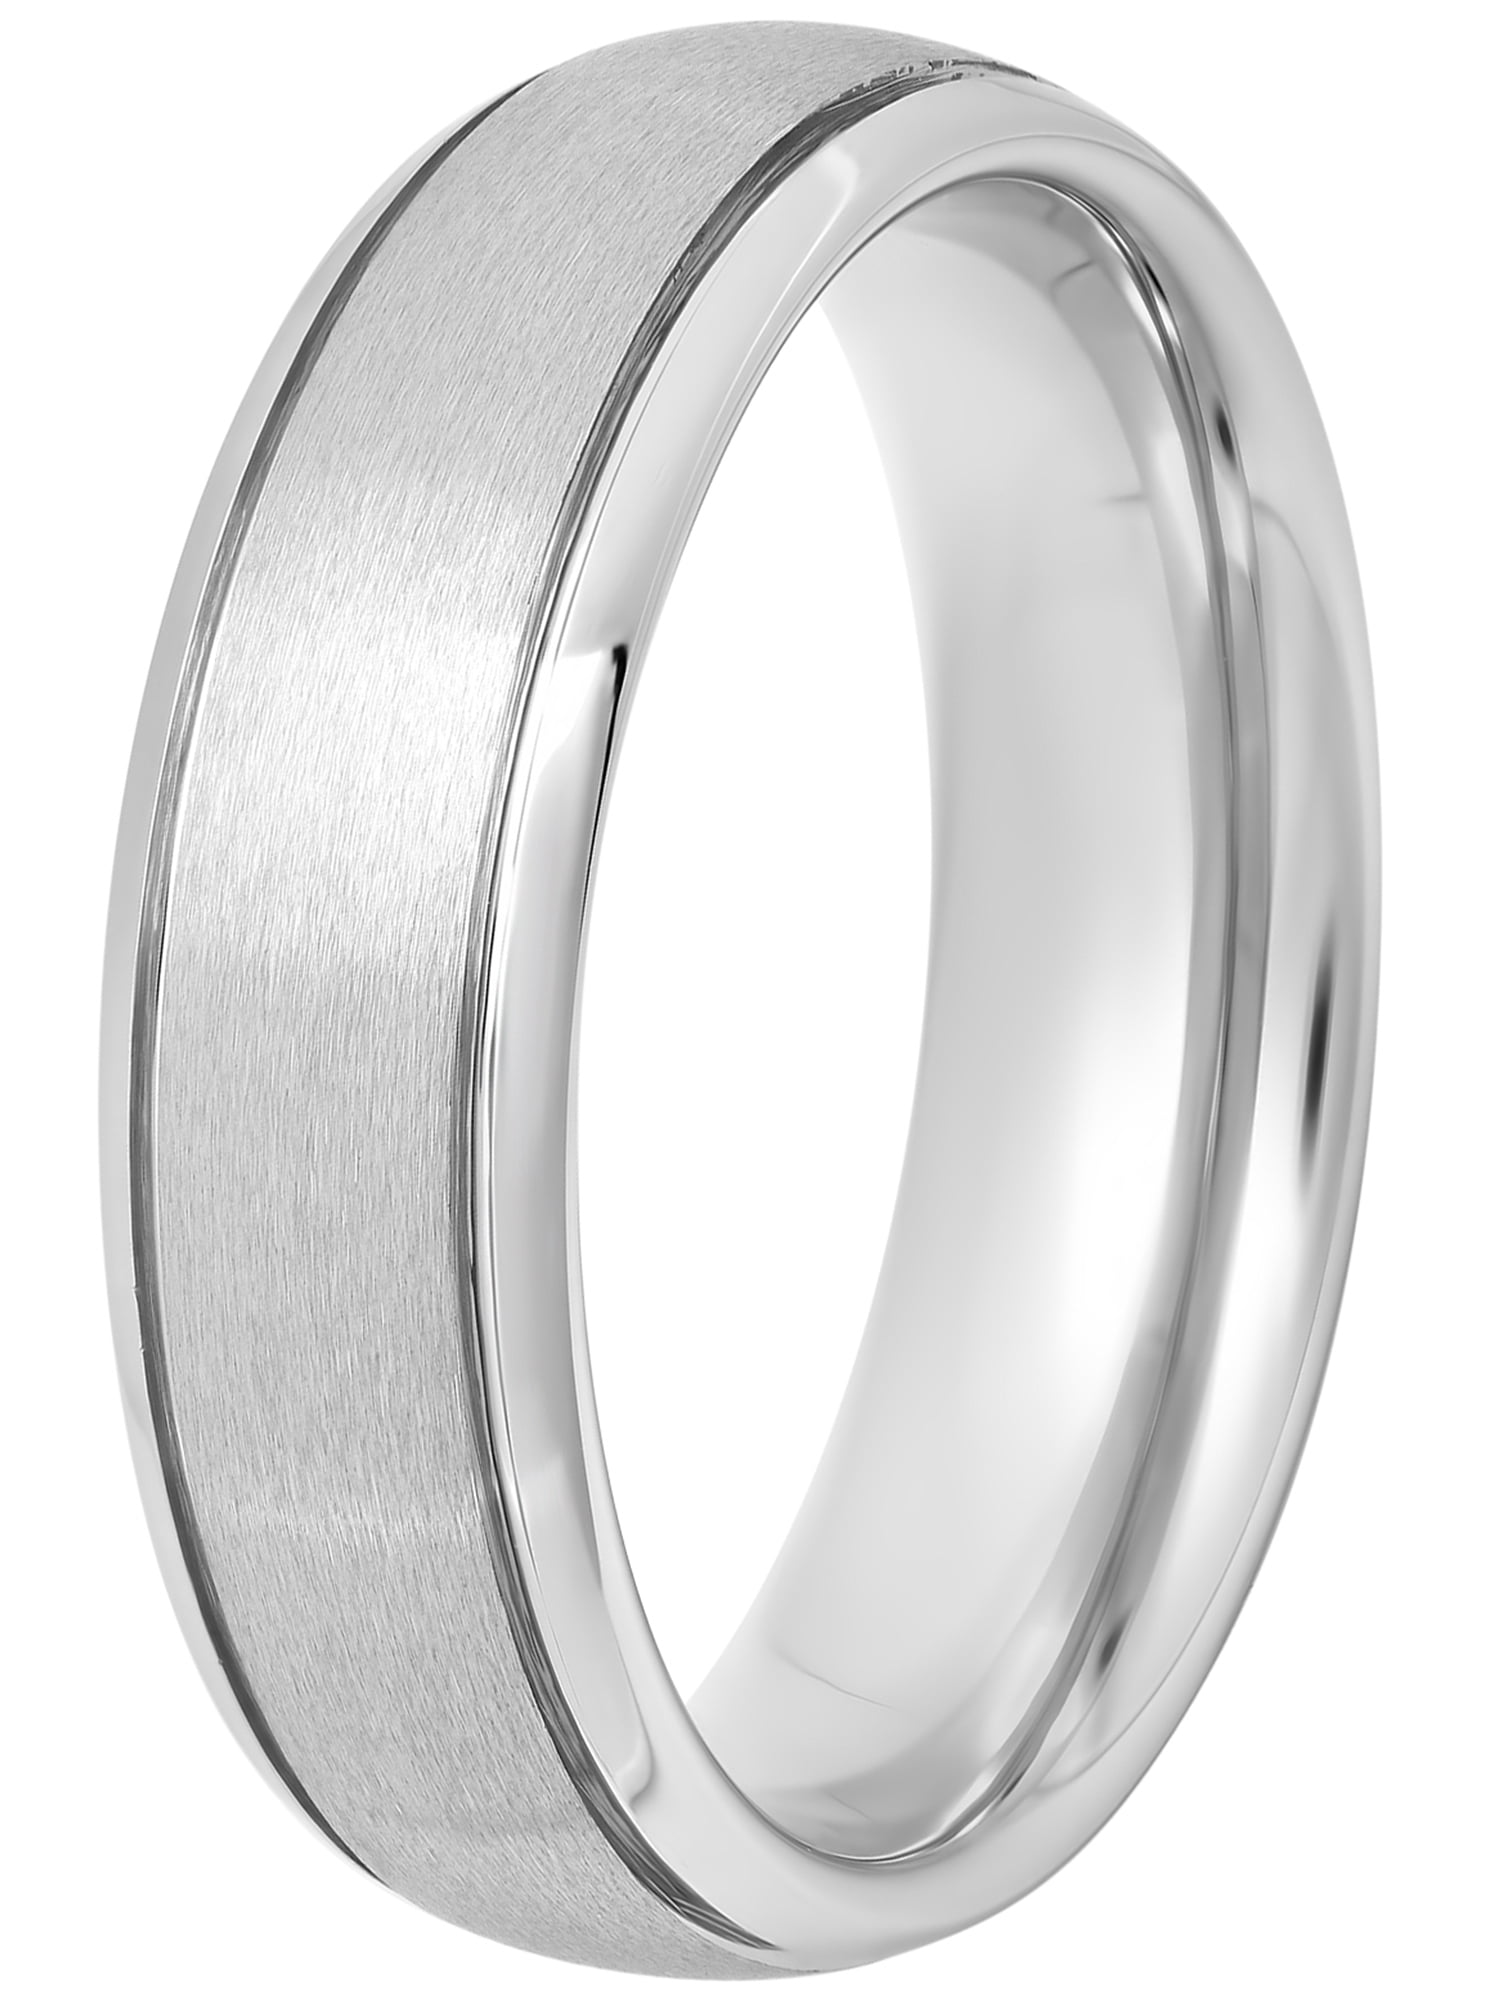 4-15 Blue Chip Unlimited Classic 7mm Polished Titanium Domed Wedding Band